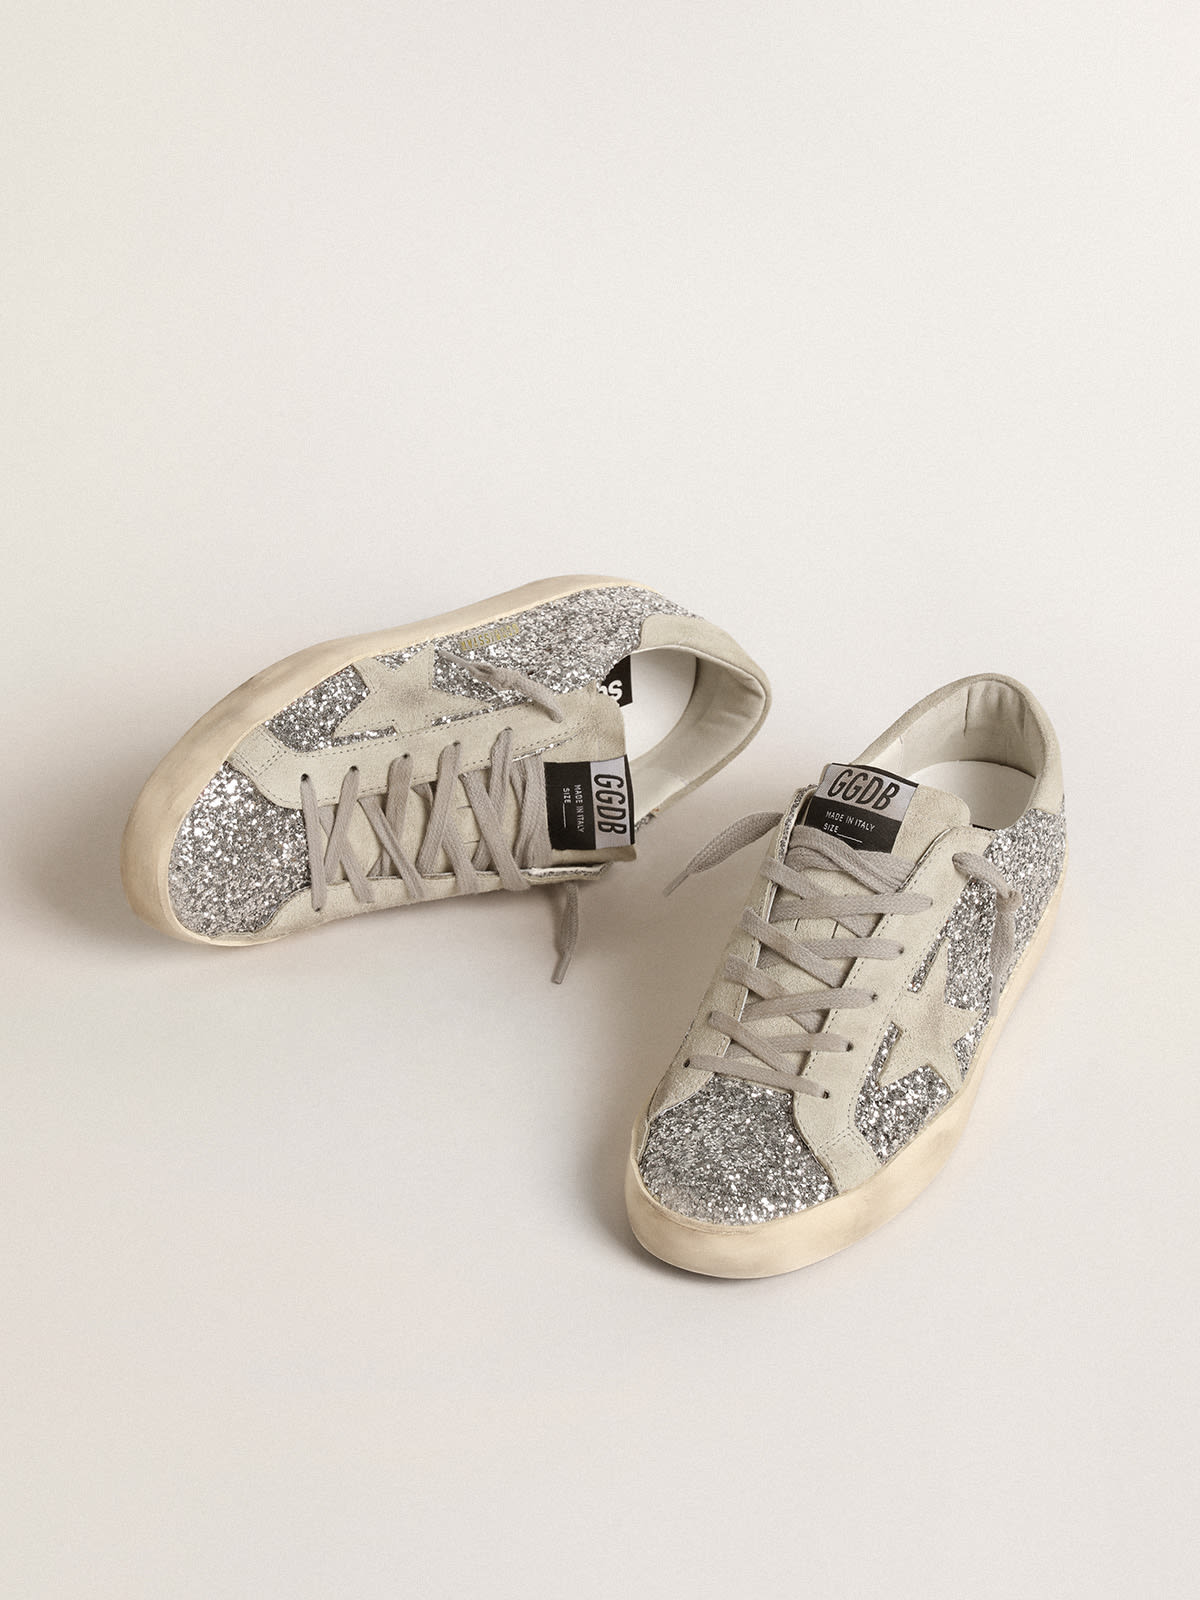 Golden Goose - Super-Star in silver glitter with ice-gray suede star in 